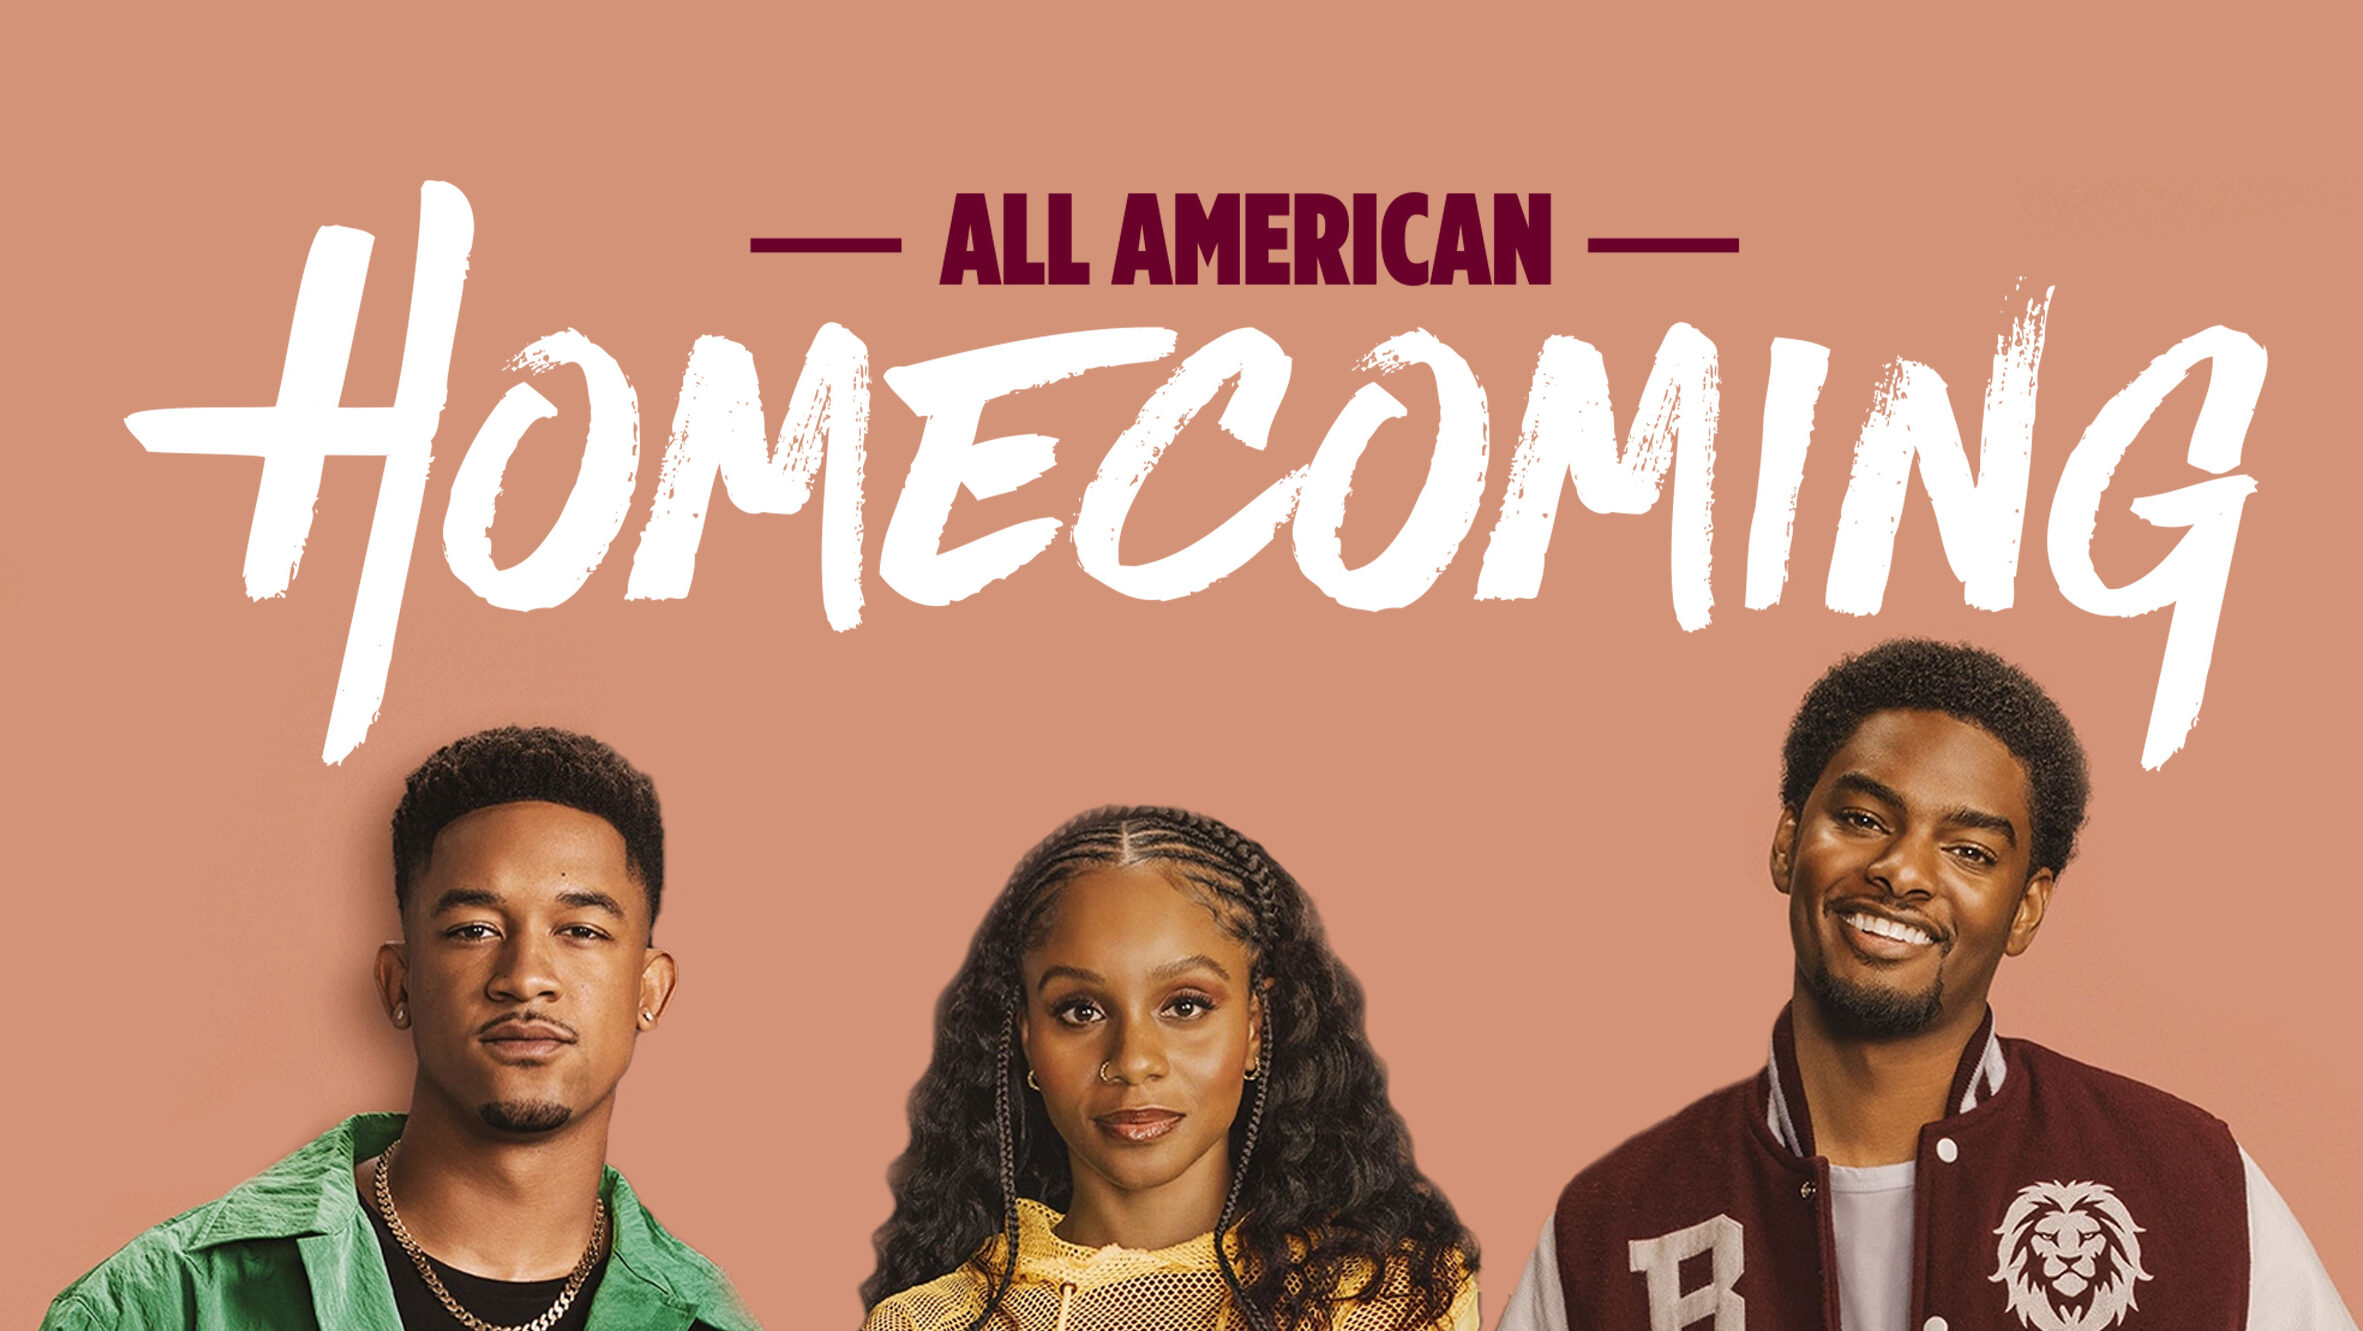 A Poster of "All American: Homecoming", a Black TV Show with a new season coming in 2024